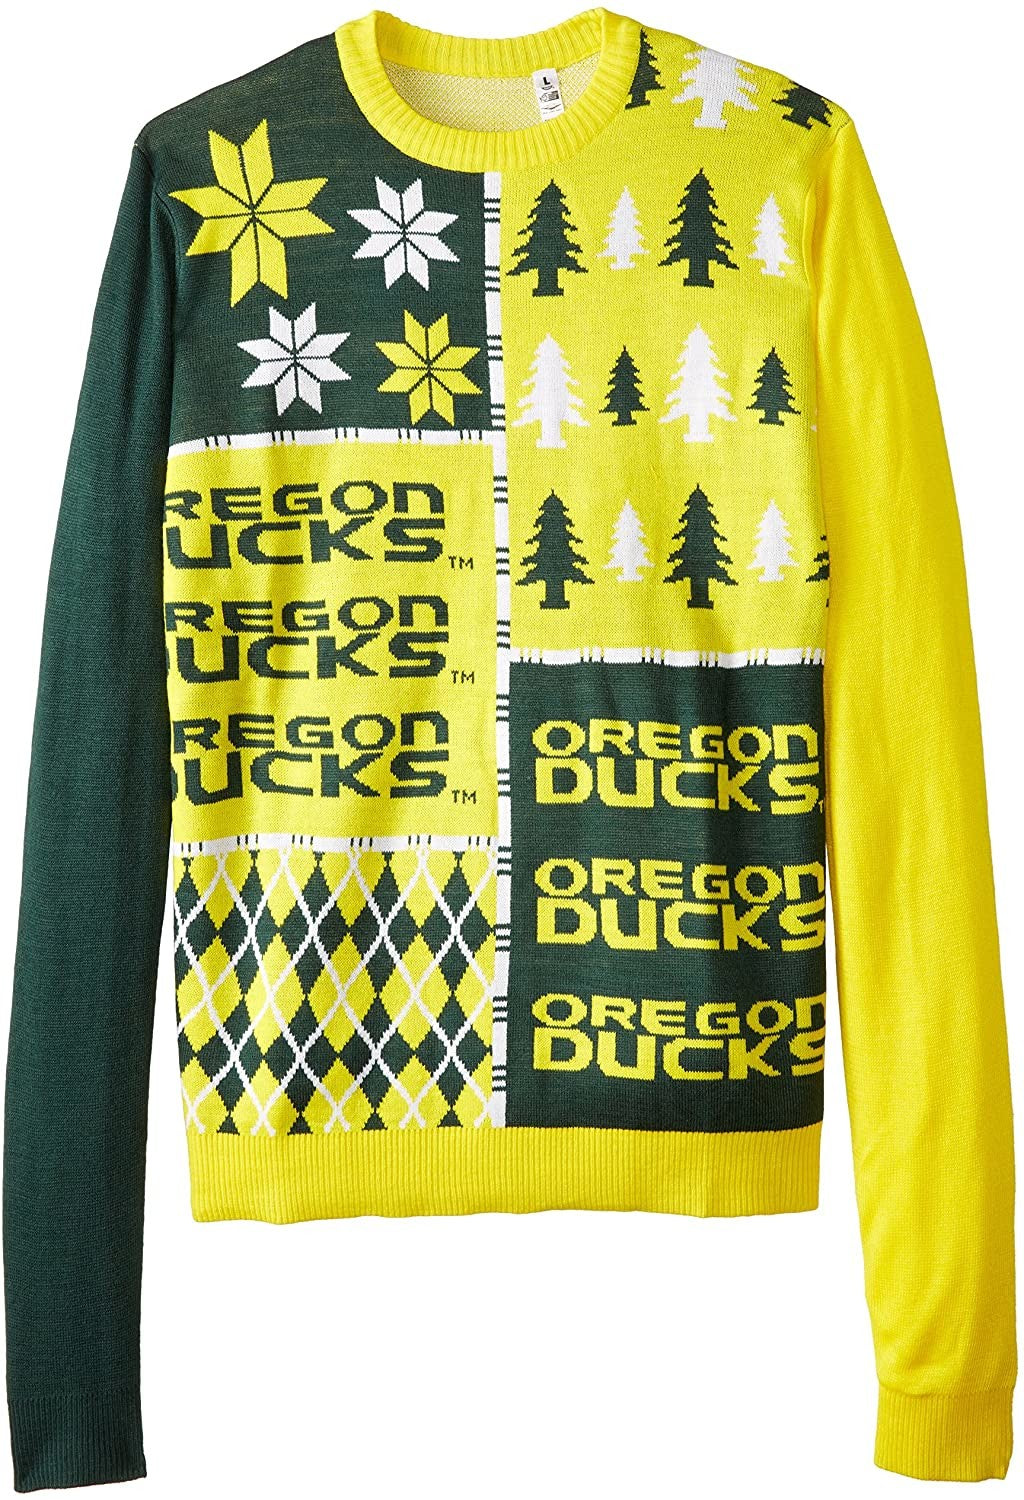 Klew NCAA Busy Block Ugly Christmas Sweater - Large - Oregon Ducks